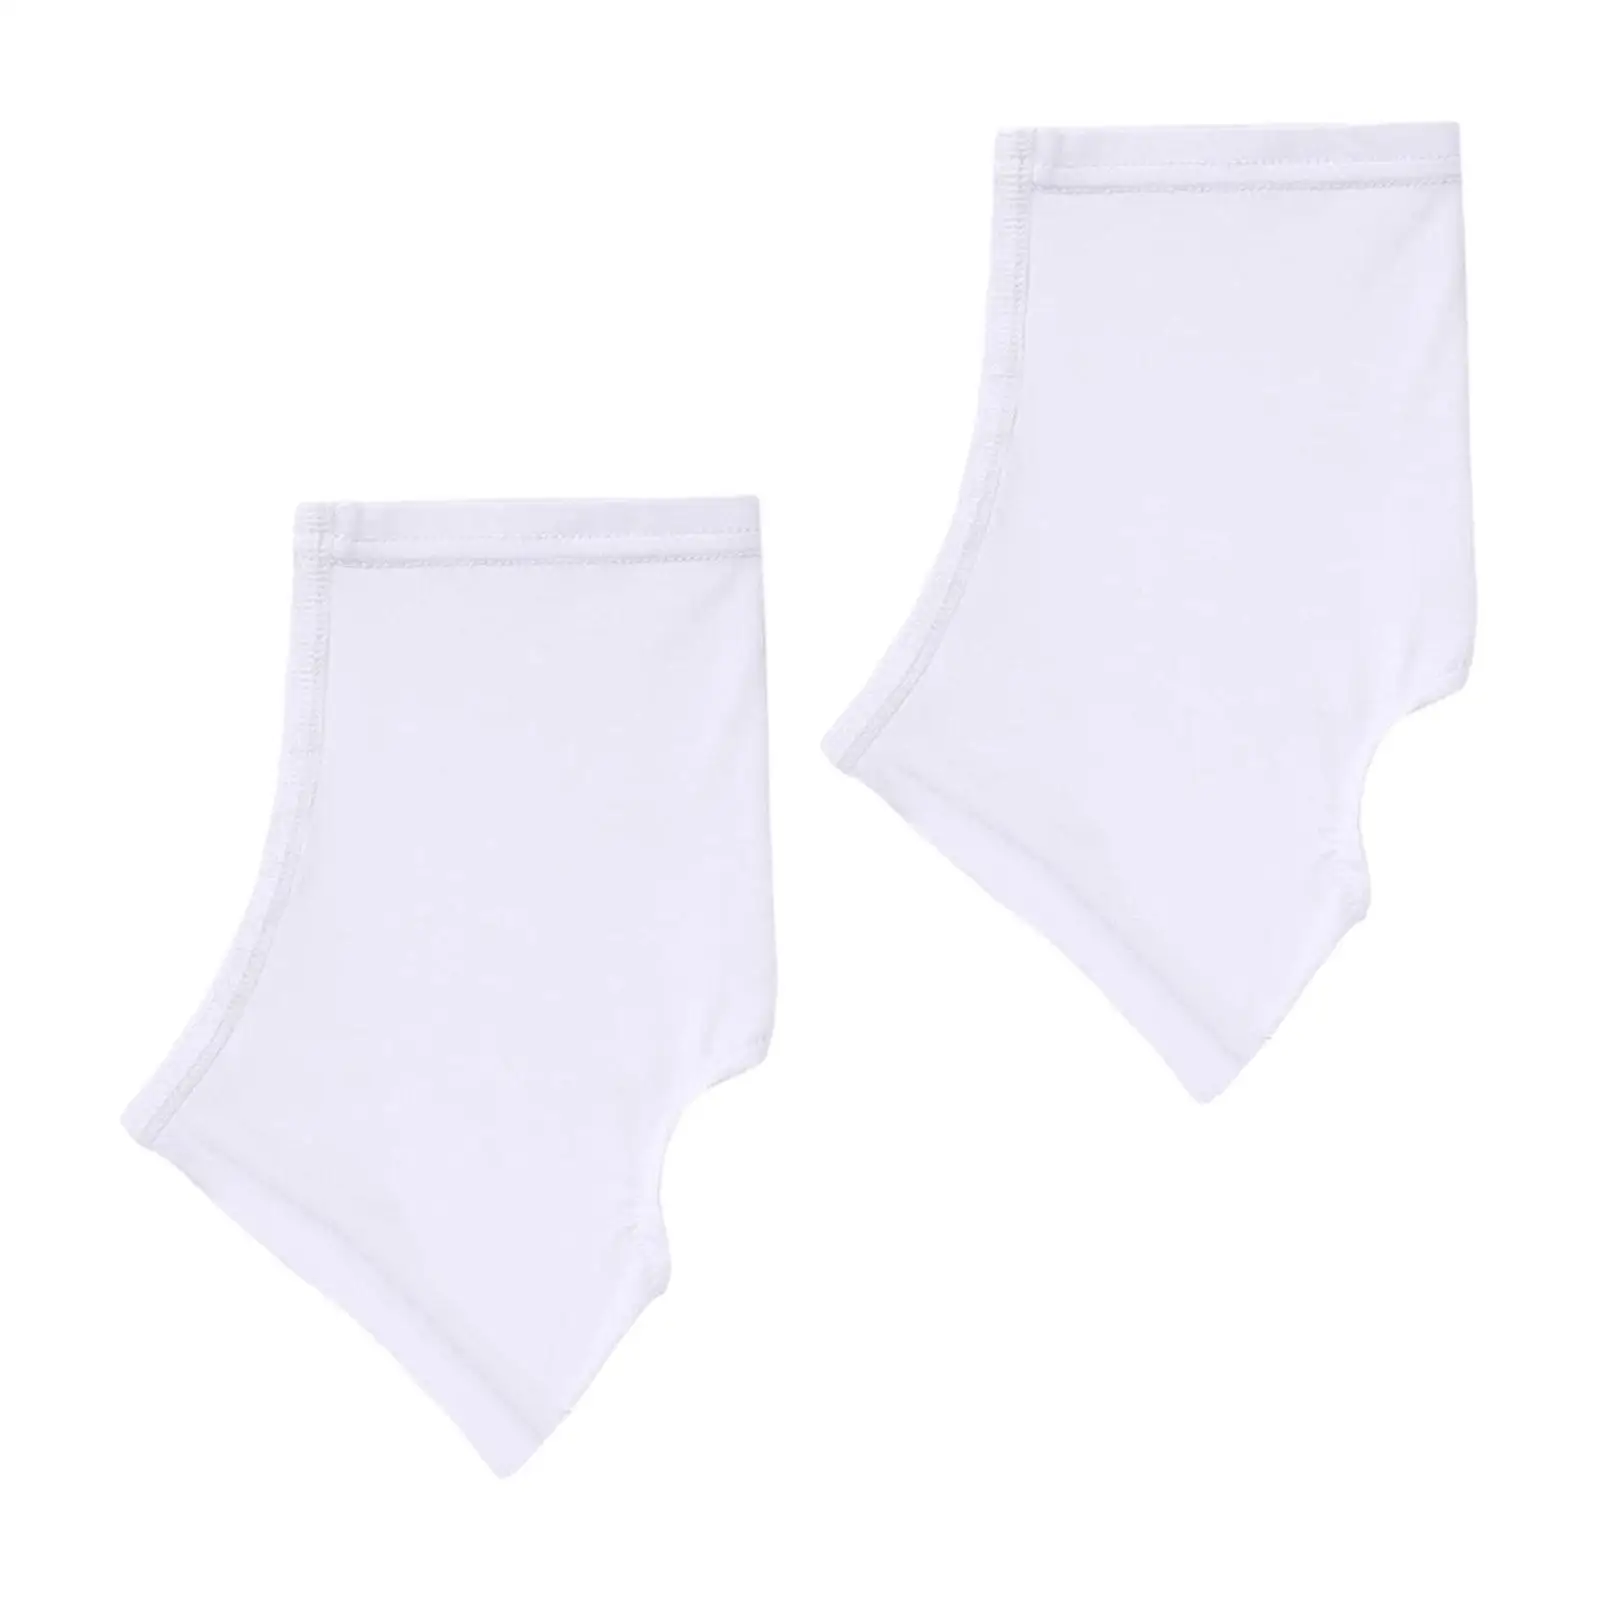 2Pcs Spats Cleat Covers Youth Wraps Softball Elastic Adults Keeps Cleats Tied Turf Pellets Out 1 Pair Cleat Sleeves